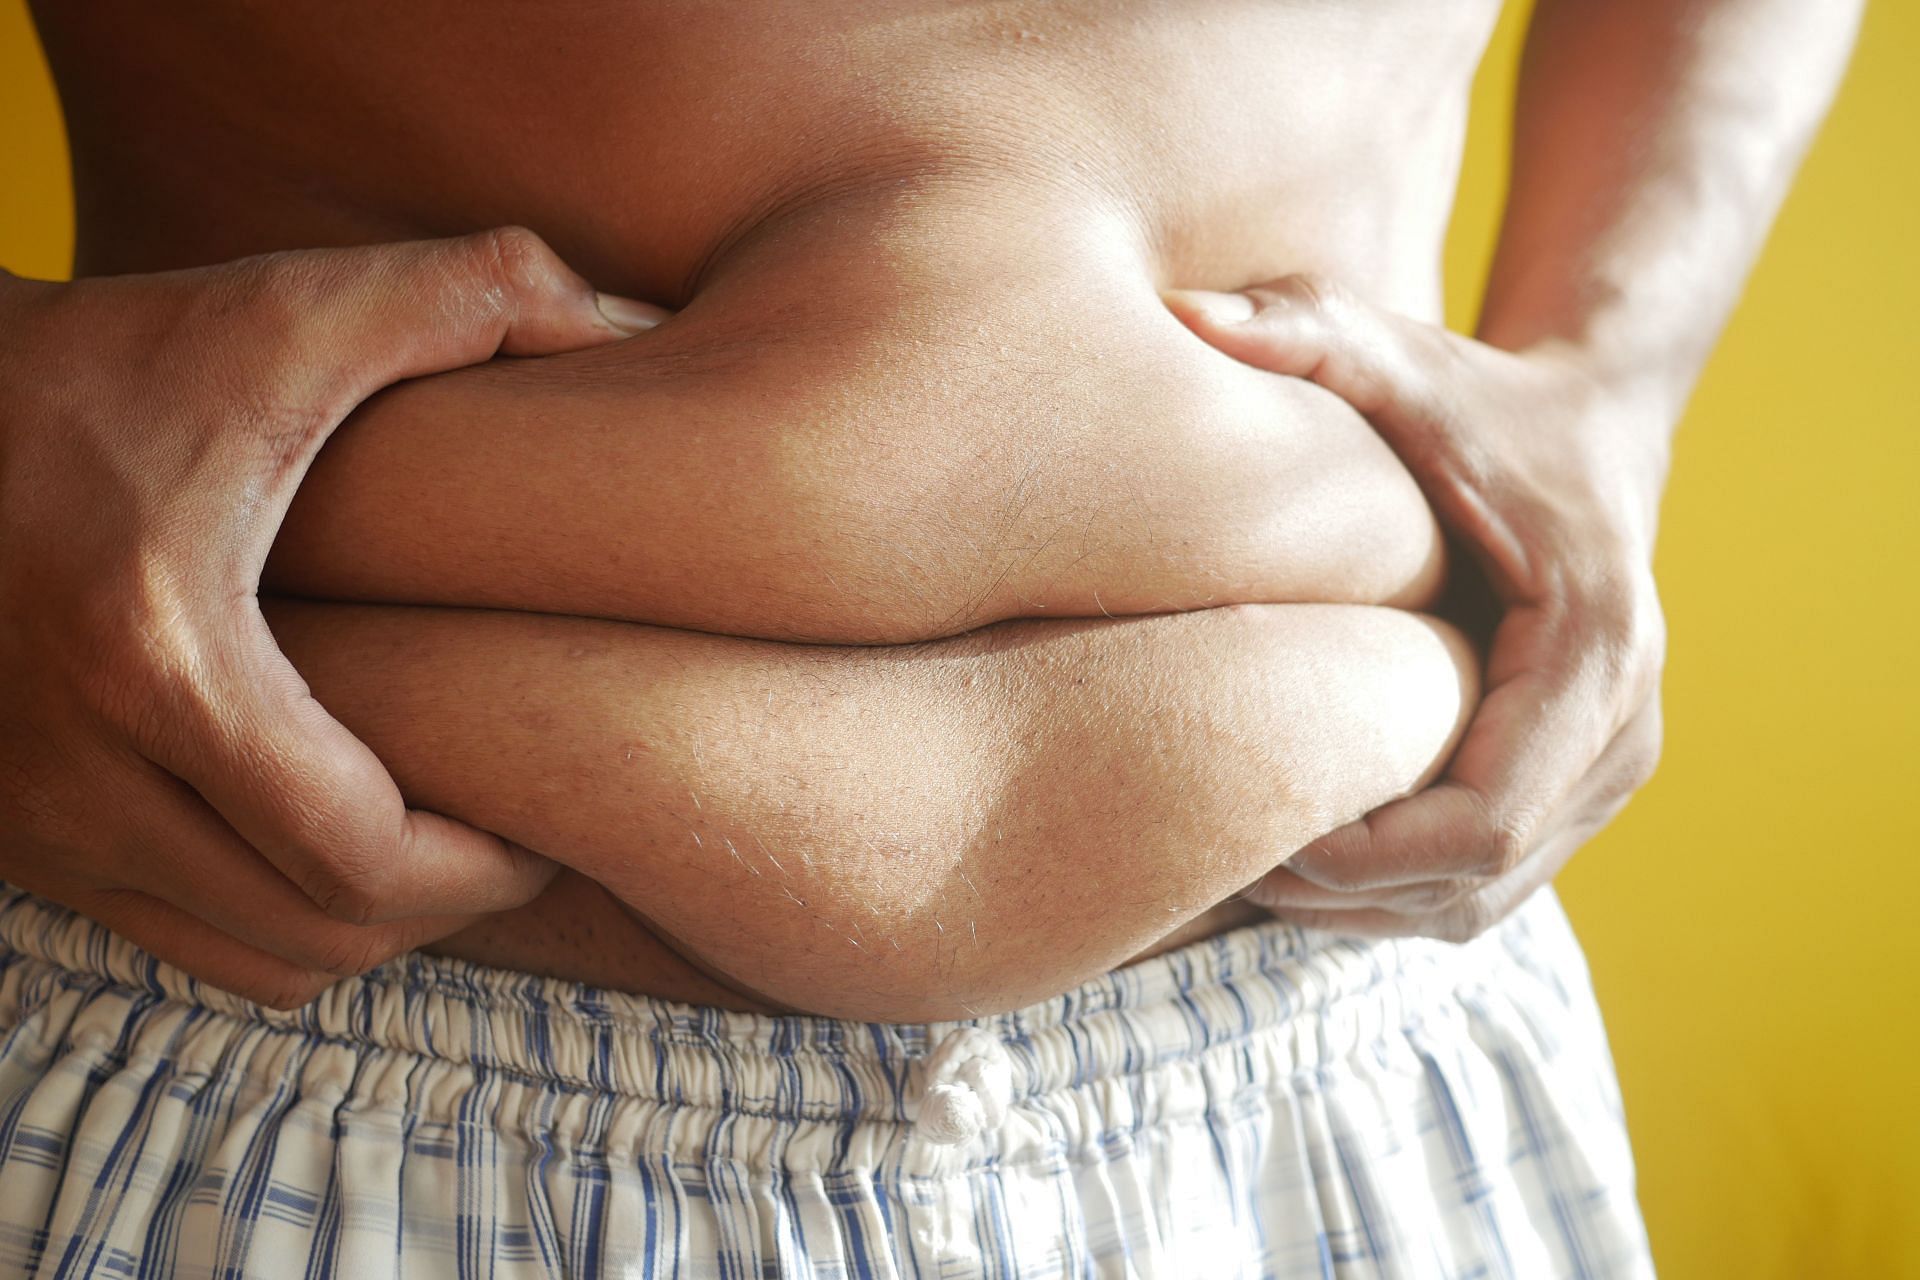 Stress belly is caused by increased levels of cortisol in your body. (Image via Pexels/ Towfiqu Barbhuiya)